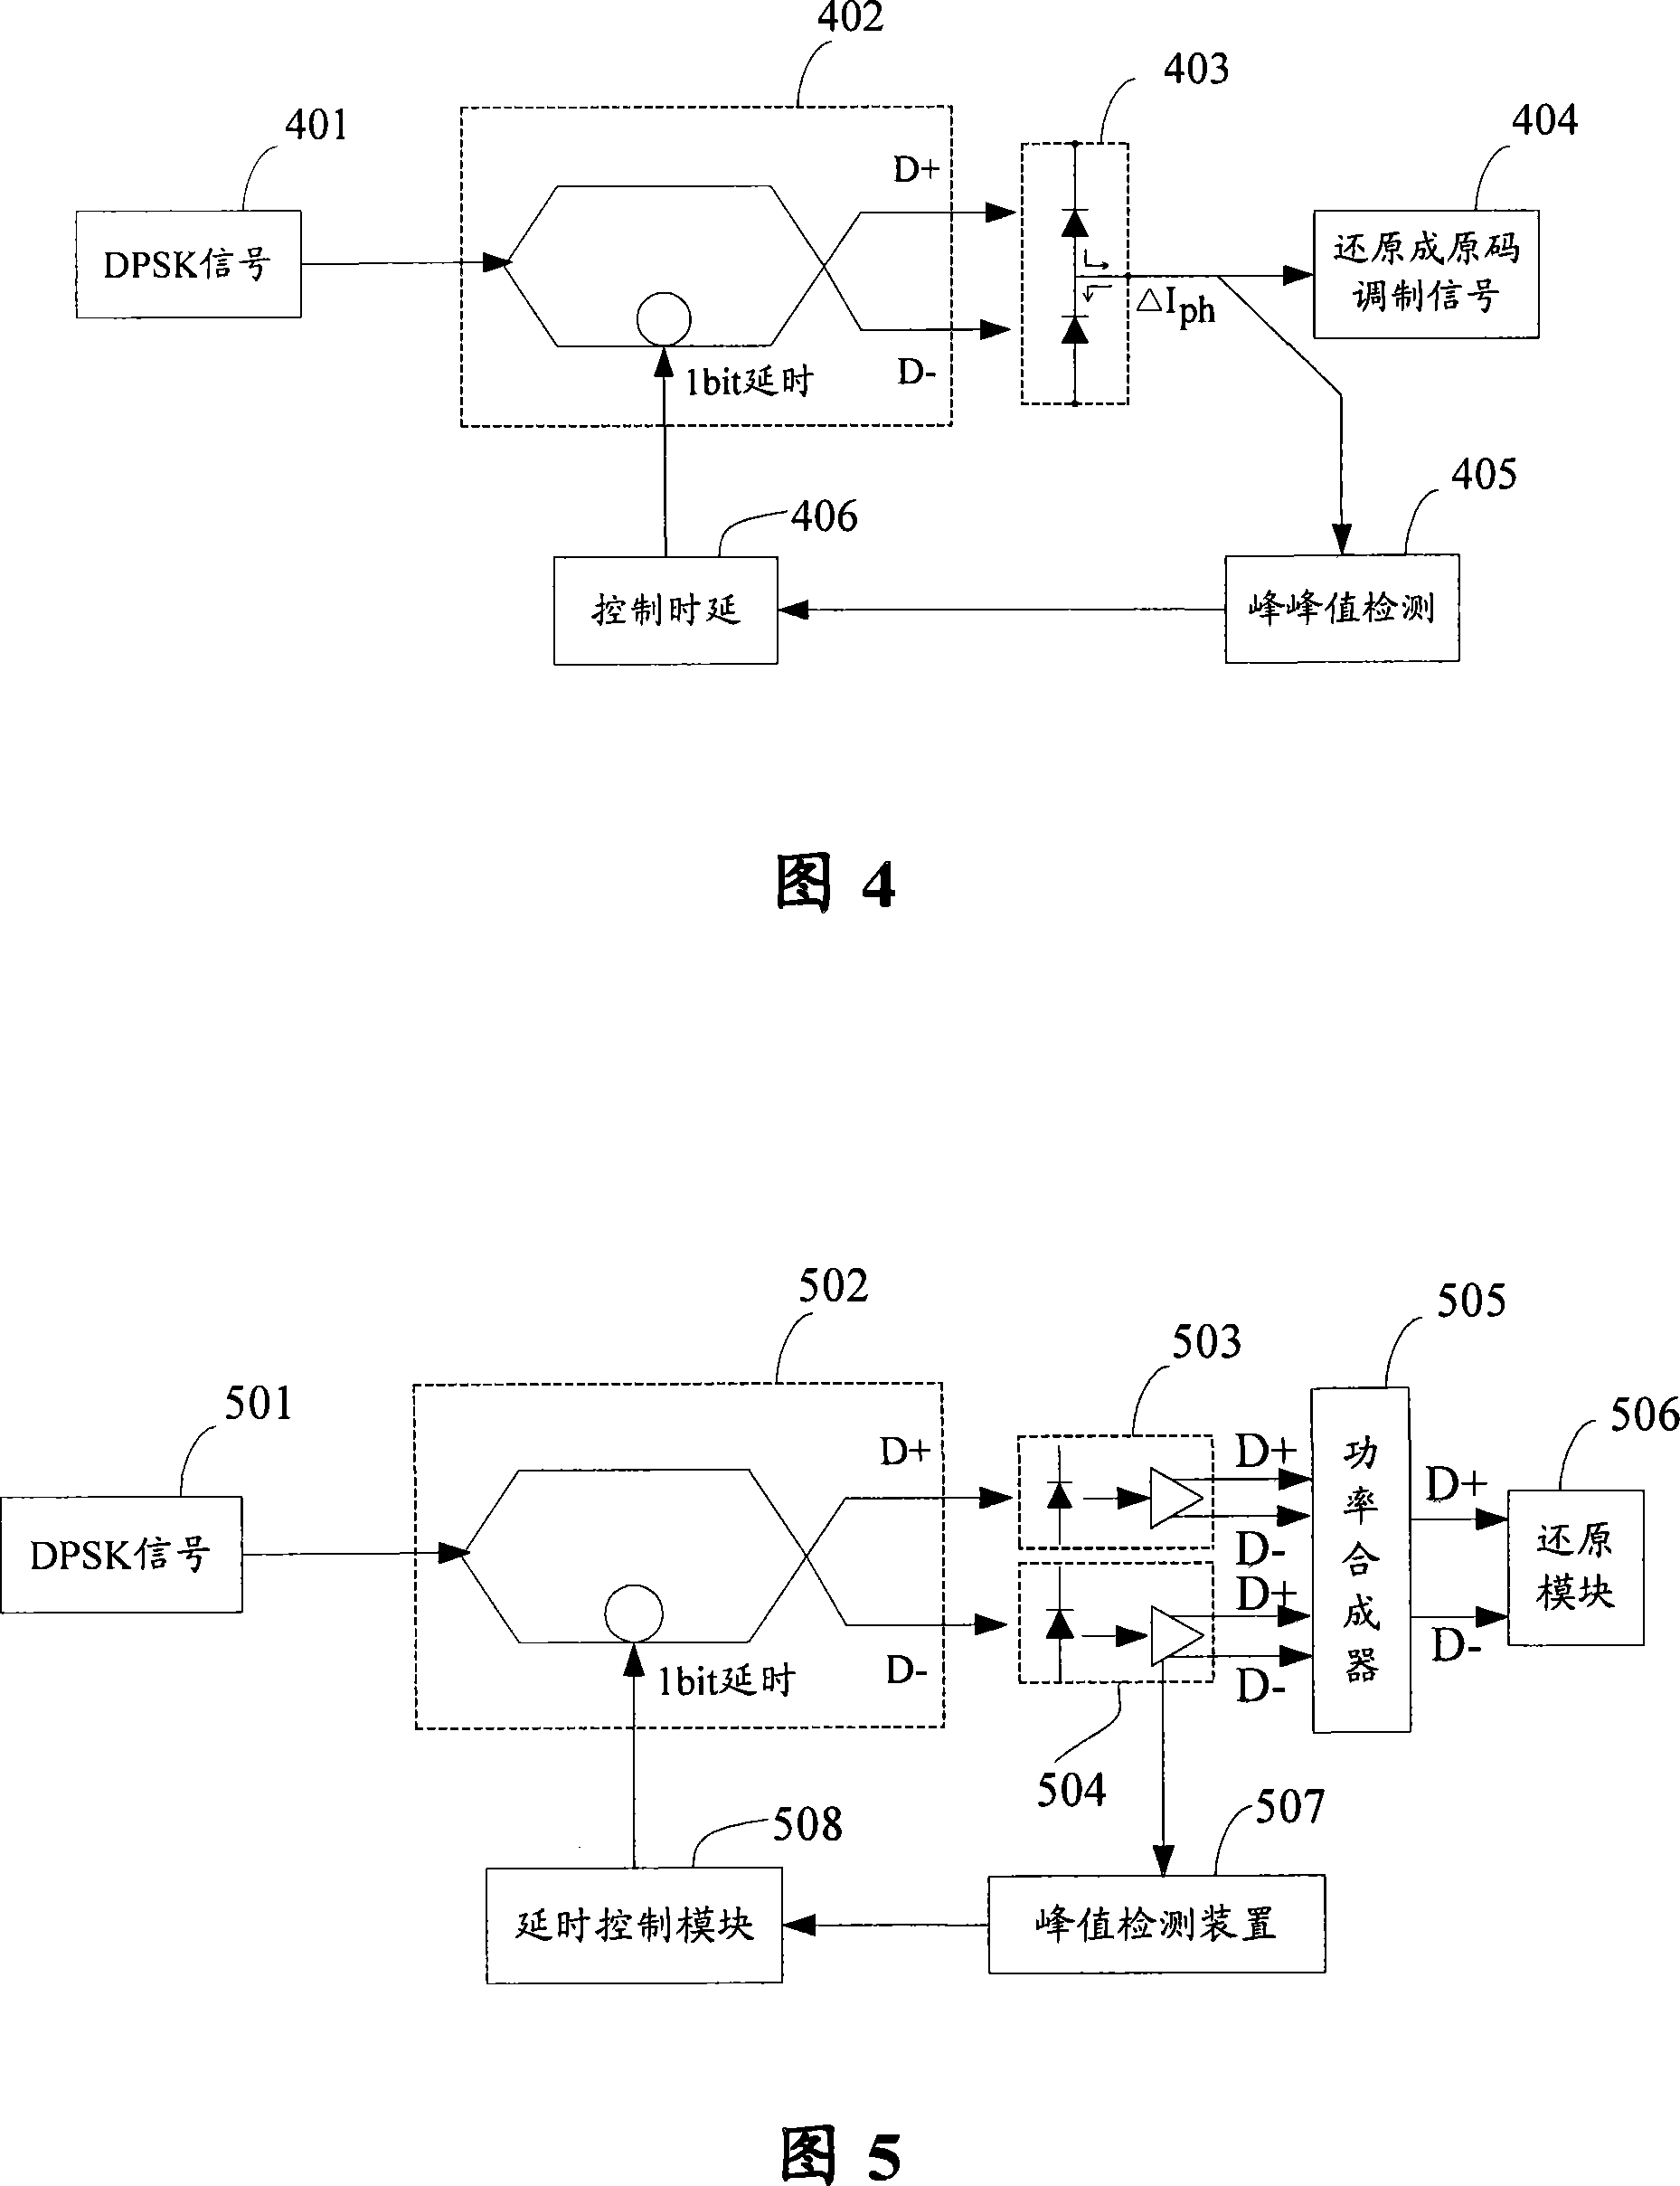 DPSK light modulation signal receiving device and method thereof